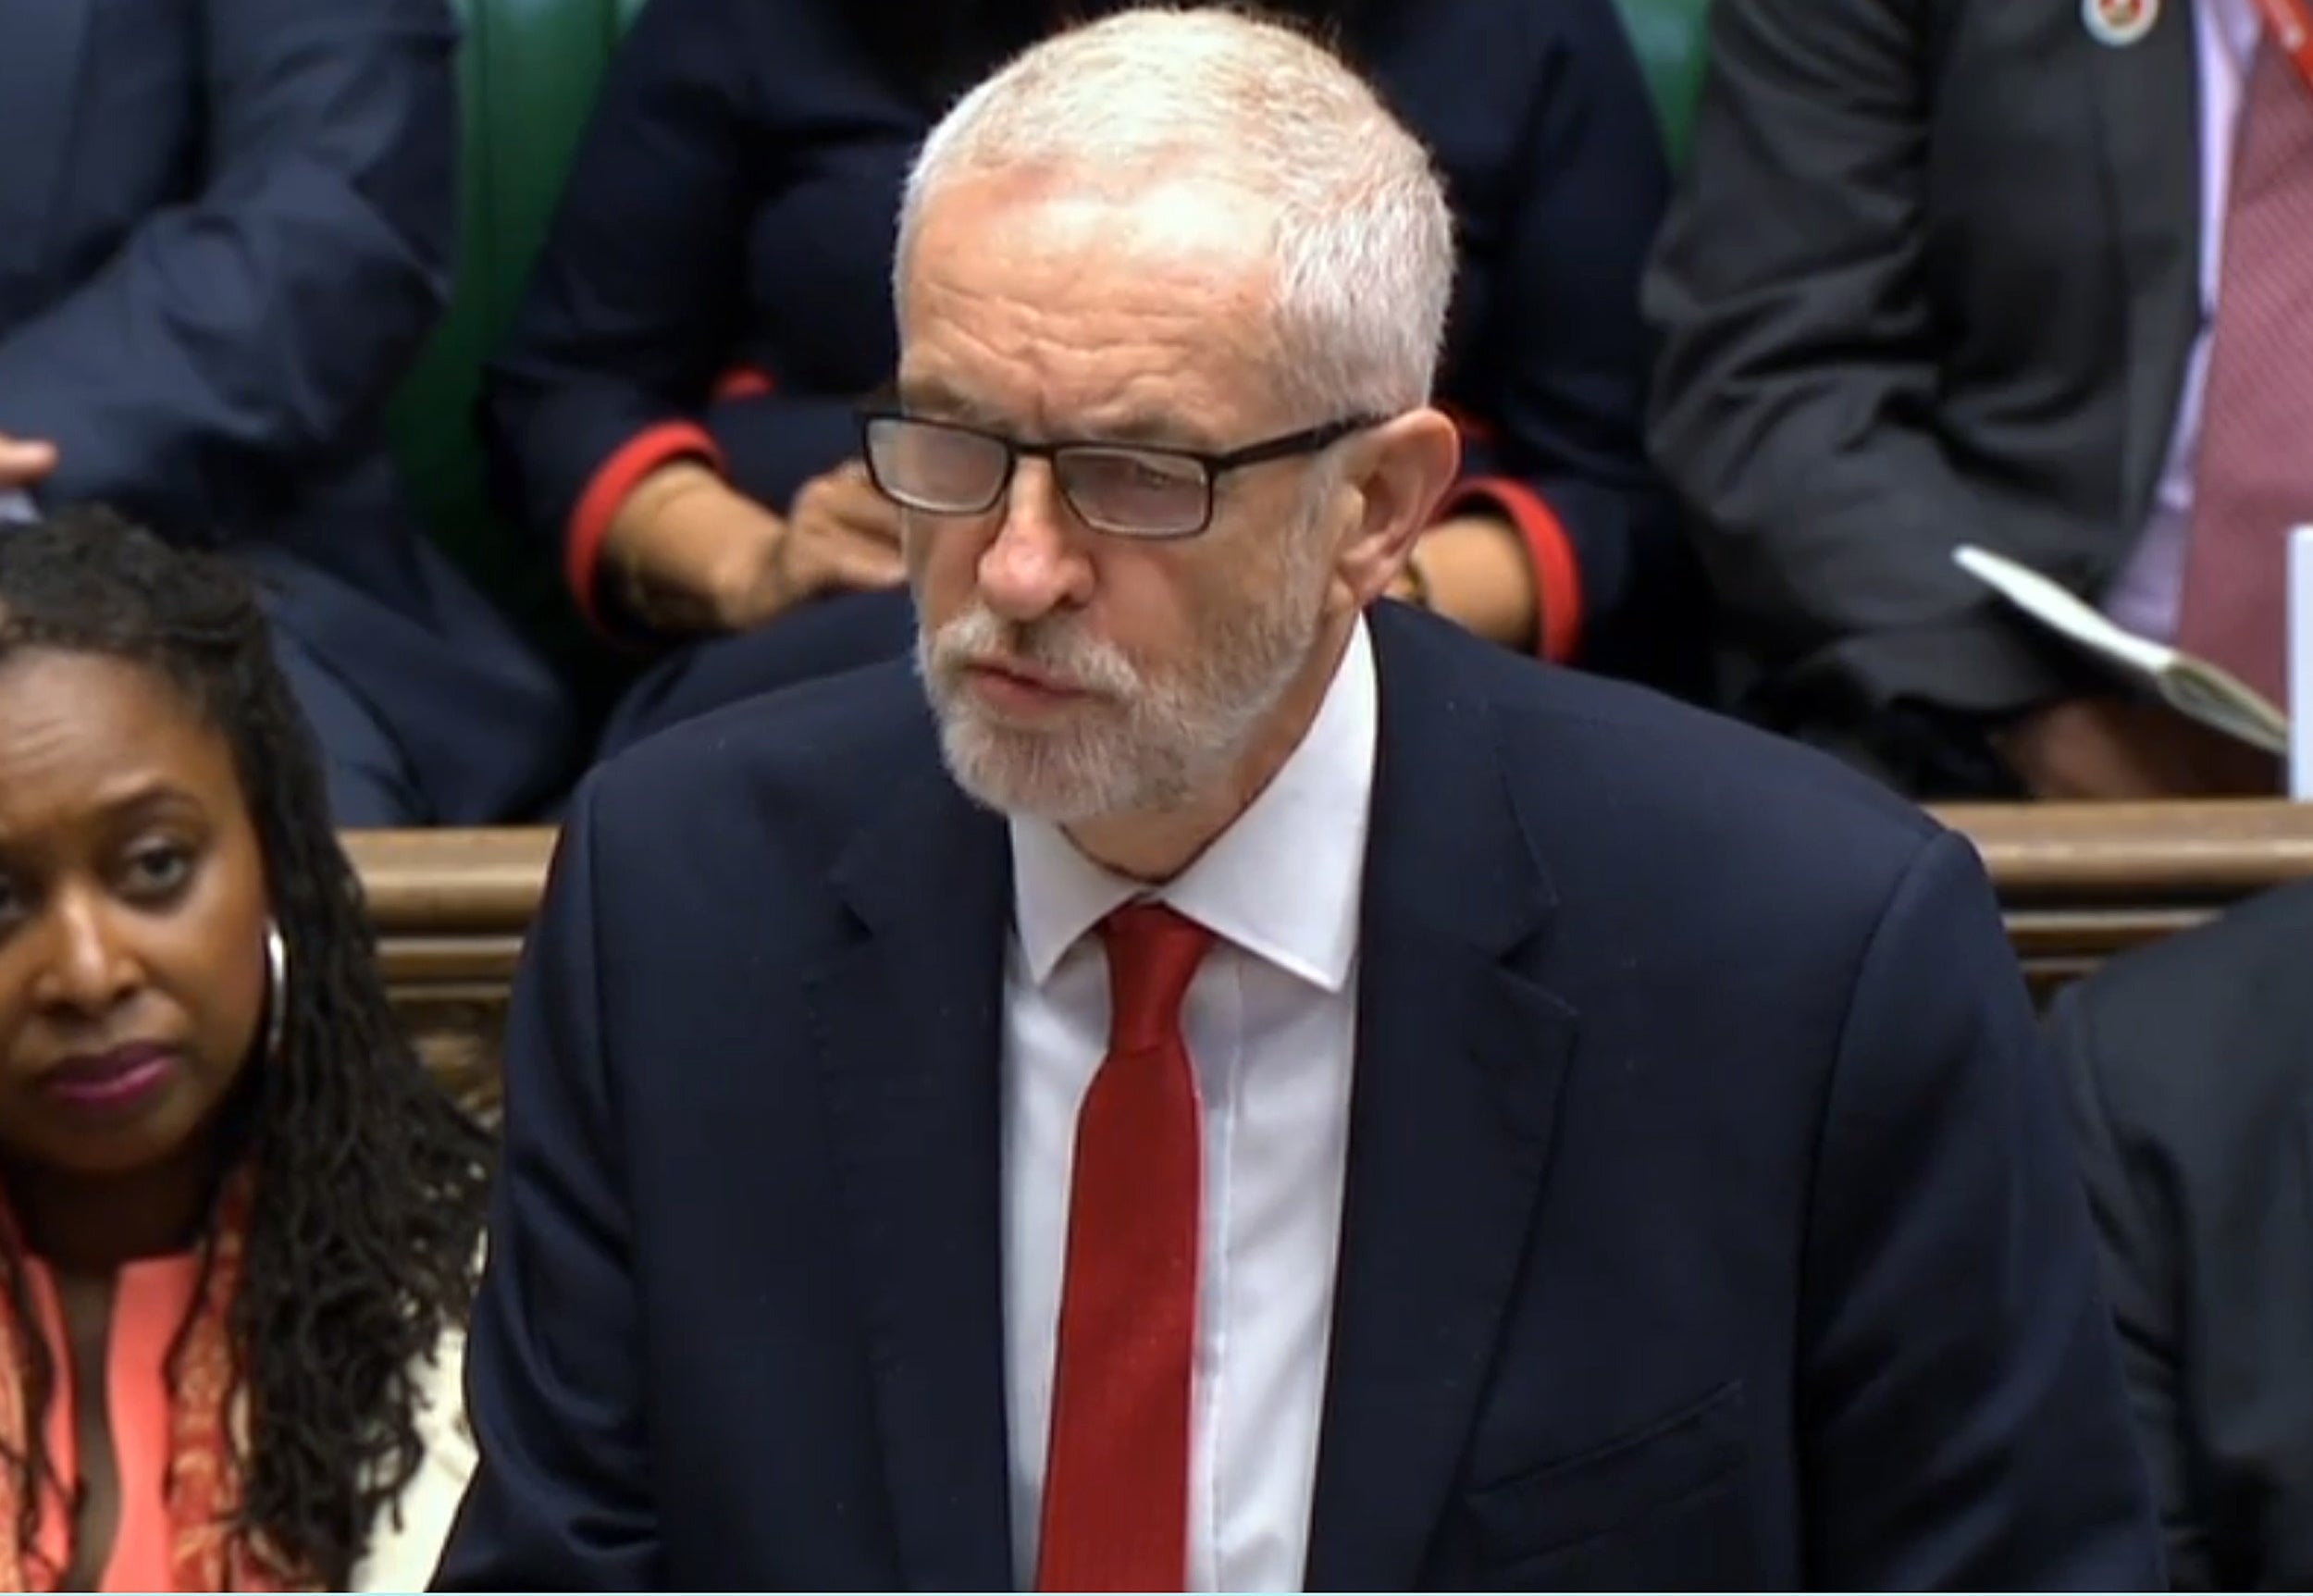 The Labour leader speaks during PMQs on Wednesday